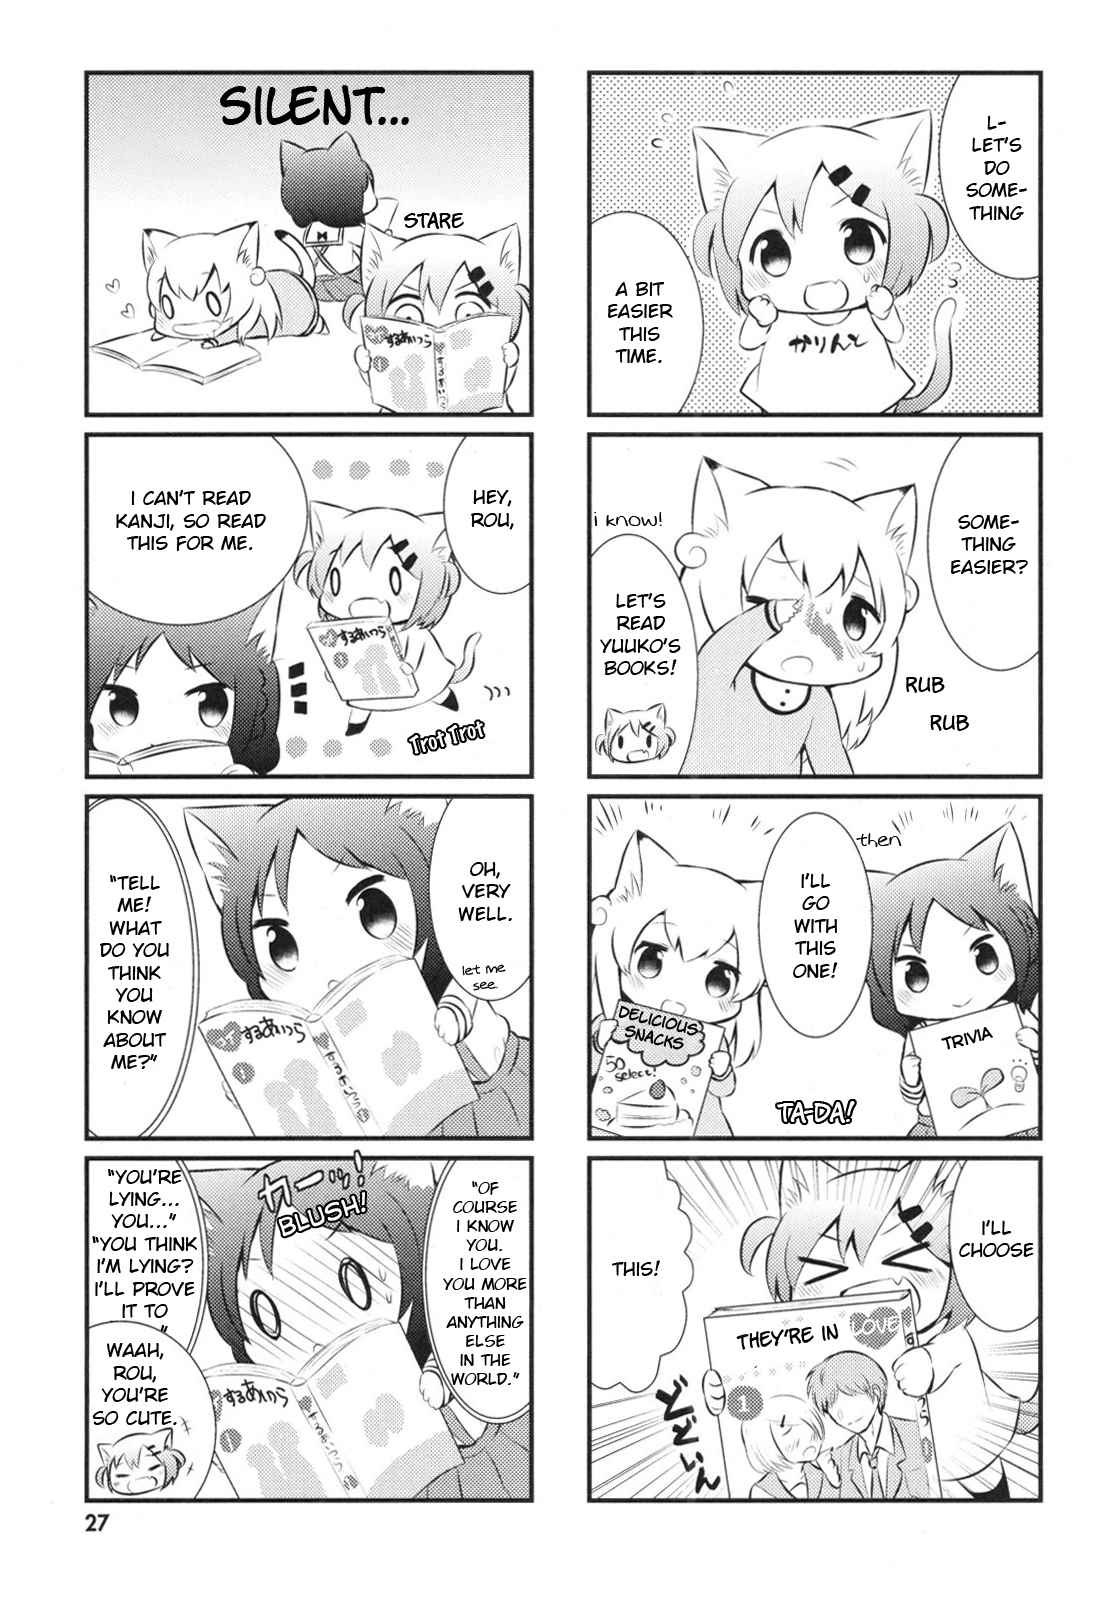 Nyanko Days Vol. 1 Ch. 3 The Cats House Sitting